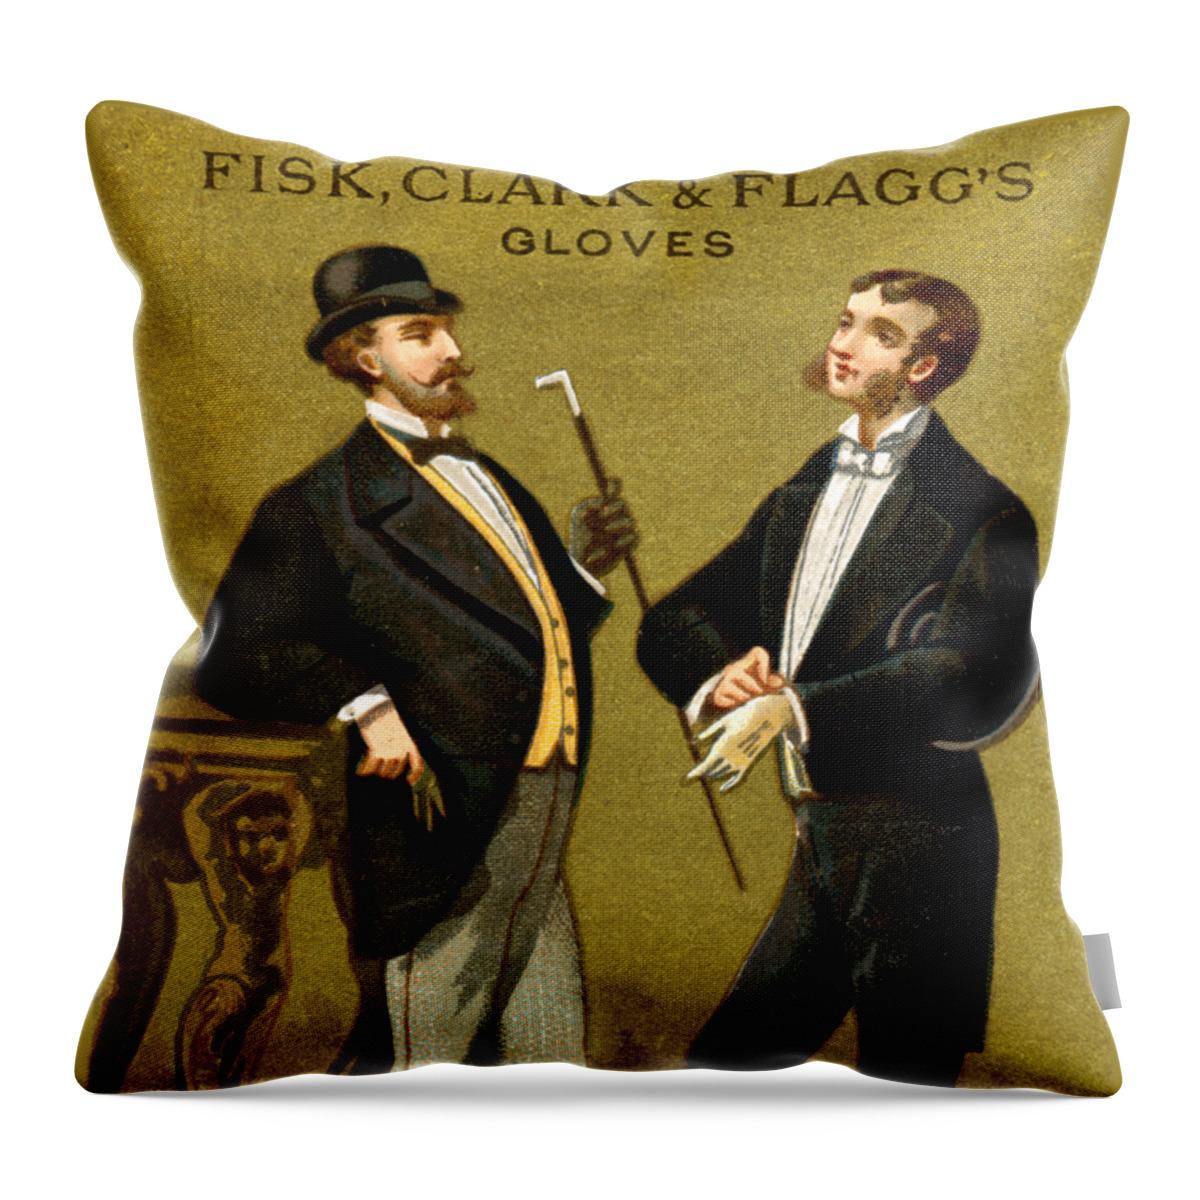 Historicimage Throw Pillow featuring the painting 19th C. Men's Gloves Poster 2 by Historic Image